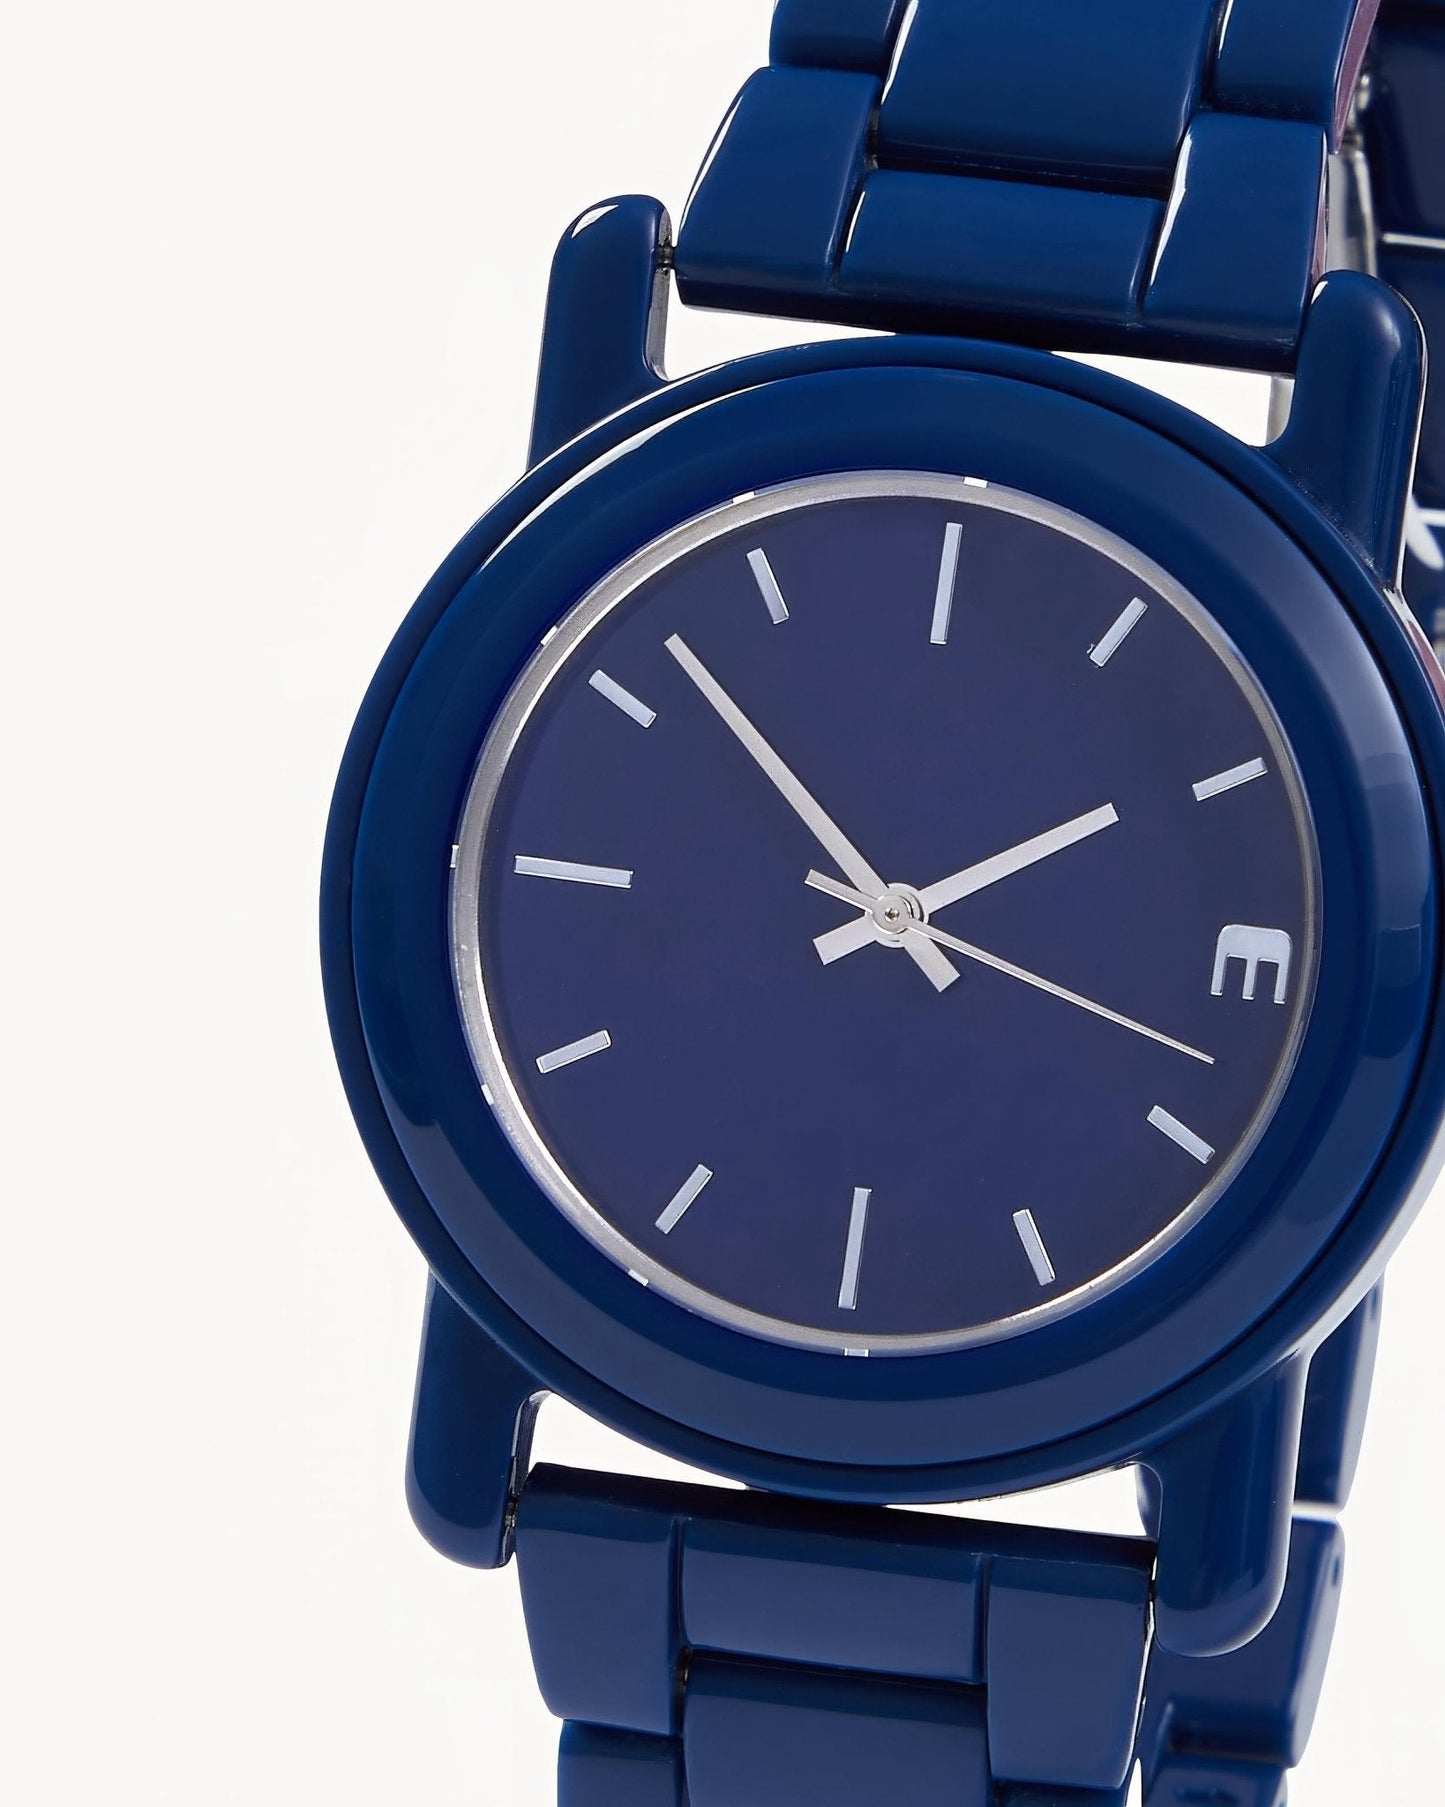 Mono Watch in French Navy - Outlet - MACHETE